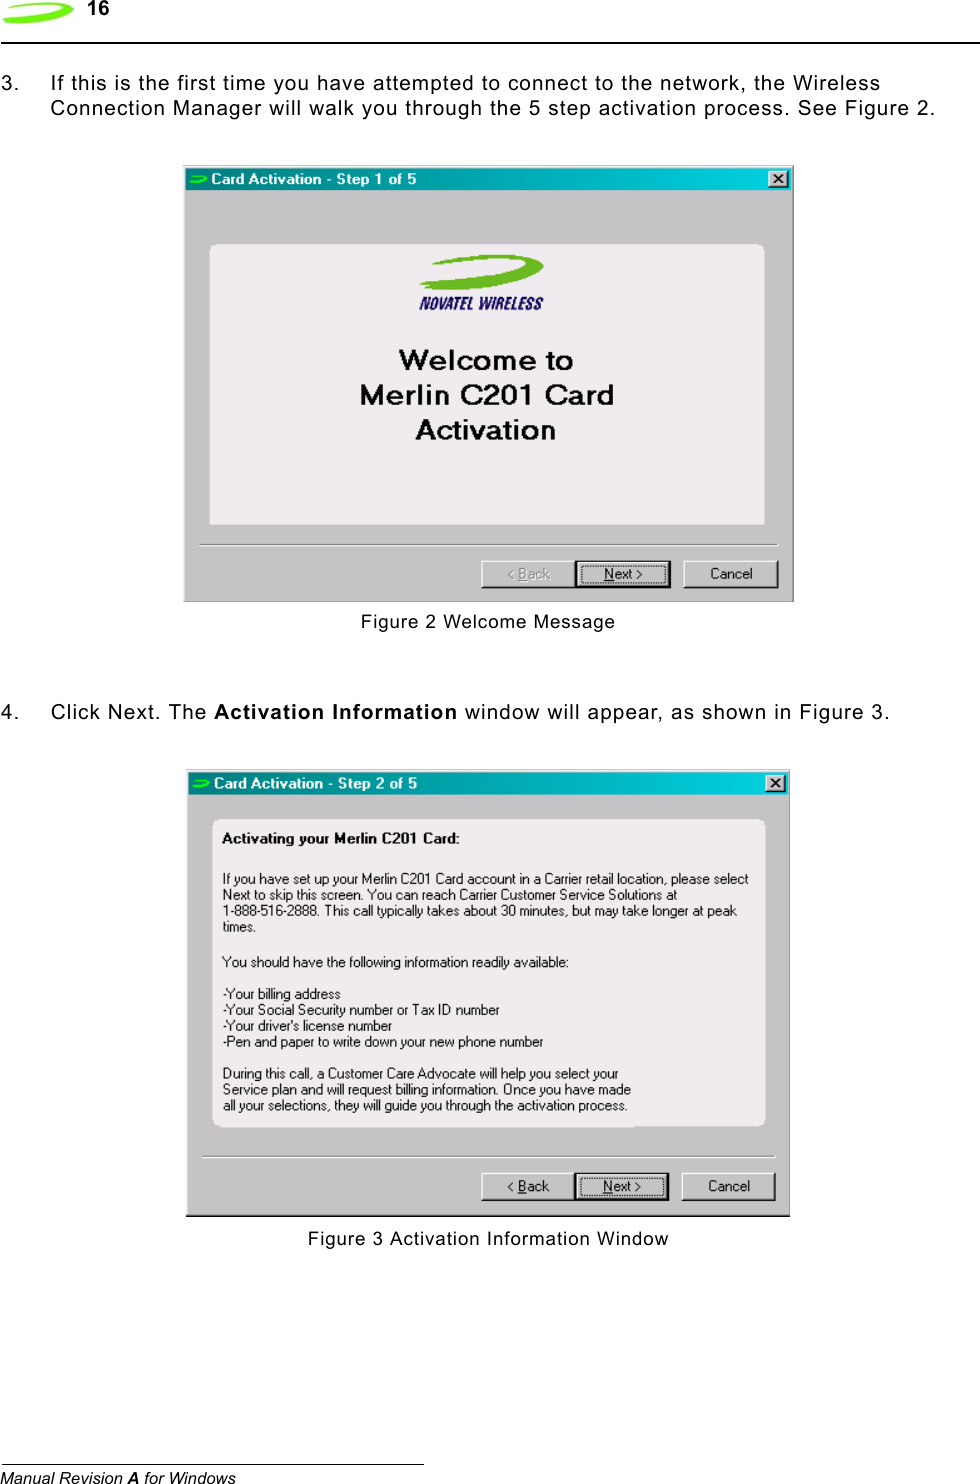 16  Manual Revision A for Windows3. If this is the first time you have attempted to connect to the network, the Wireless Connection Manager will walk you through the 5 step activation process. See Figure 2.Figure 2 Welcome Message   4. Click Next. The Activation Information window will appear, as shown in Figure 3. Figure 3 Activation Information Window